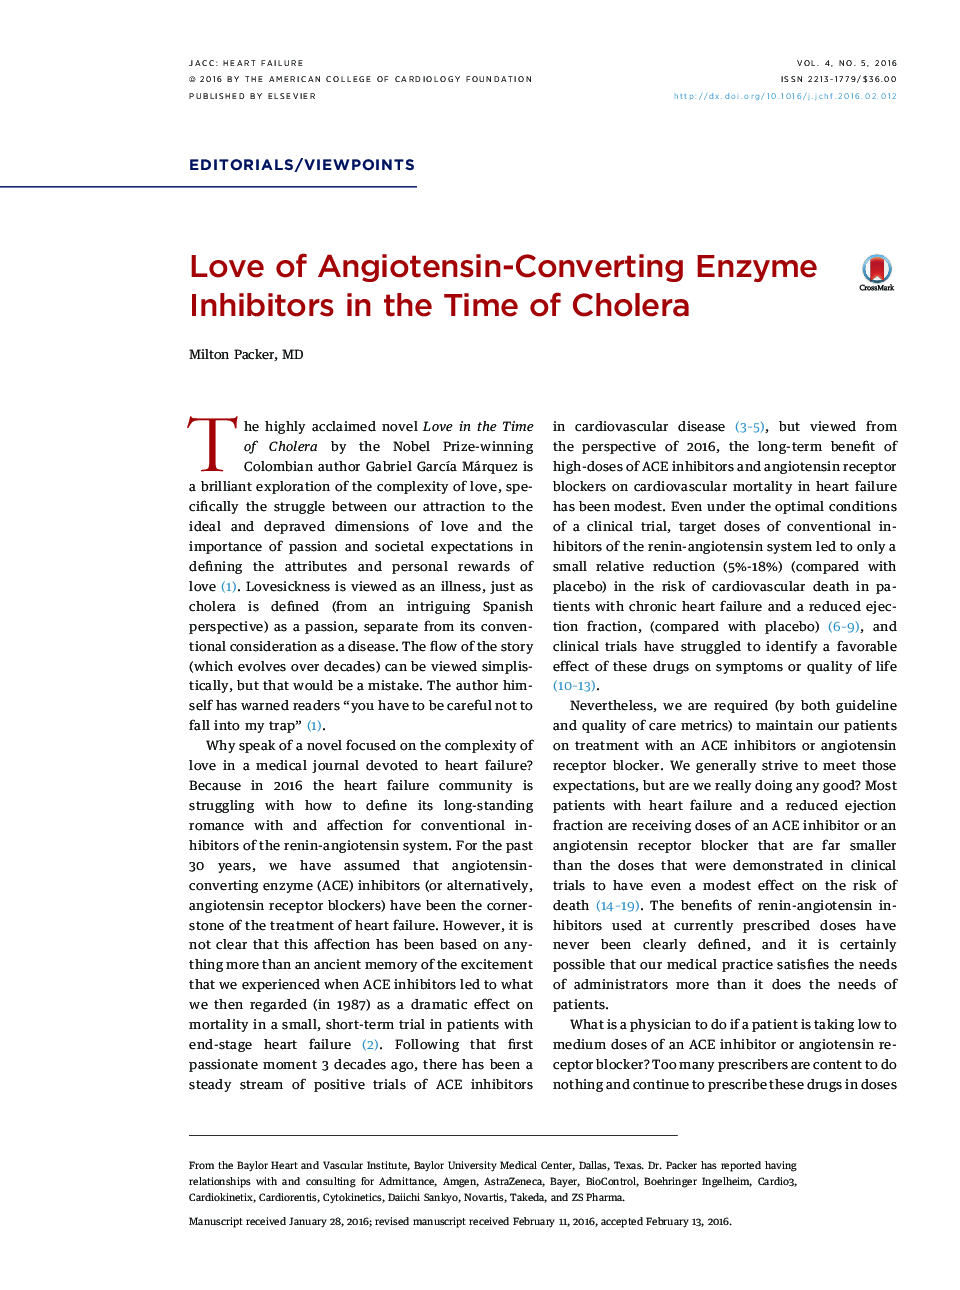 Love of Angiotensin-Converting Enzyme Inhibitors in the Time of Cholera